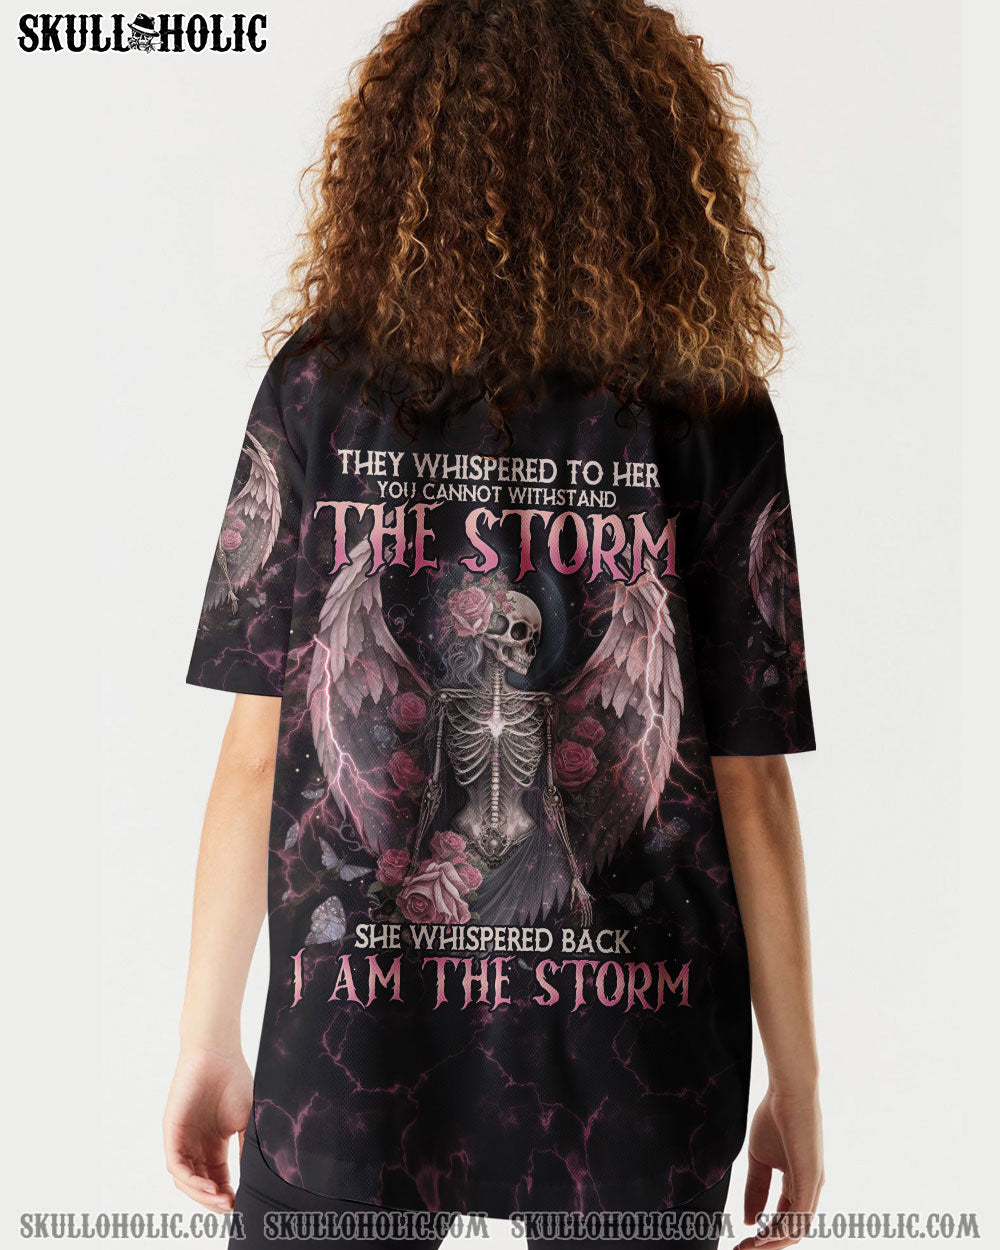 I AM THE STORM SKELETON ROSES WINGS BASEBALL JERSEY - TLNO0702232